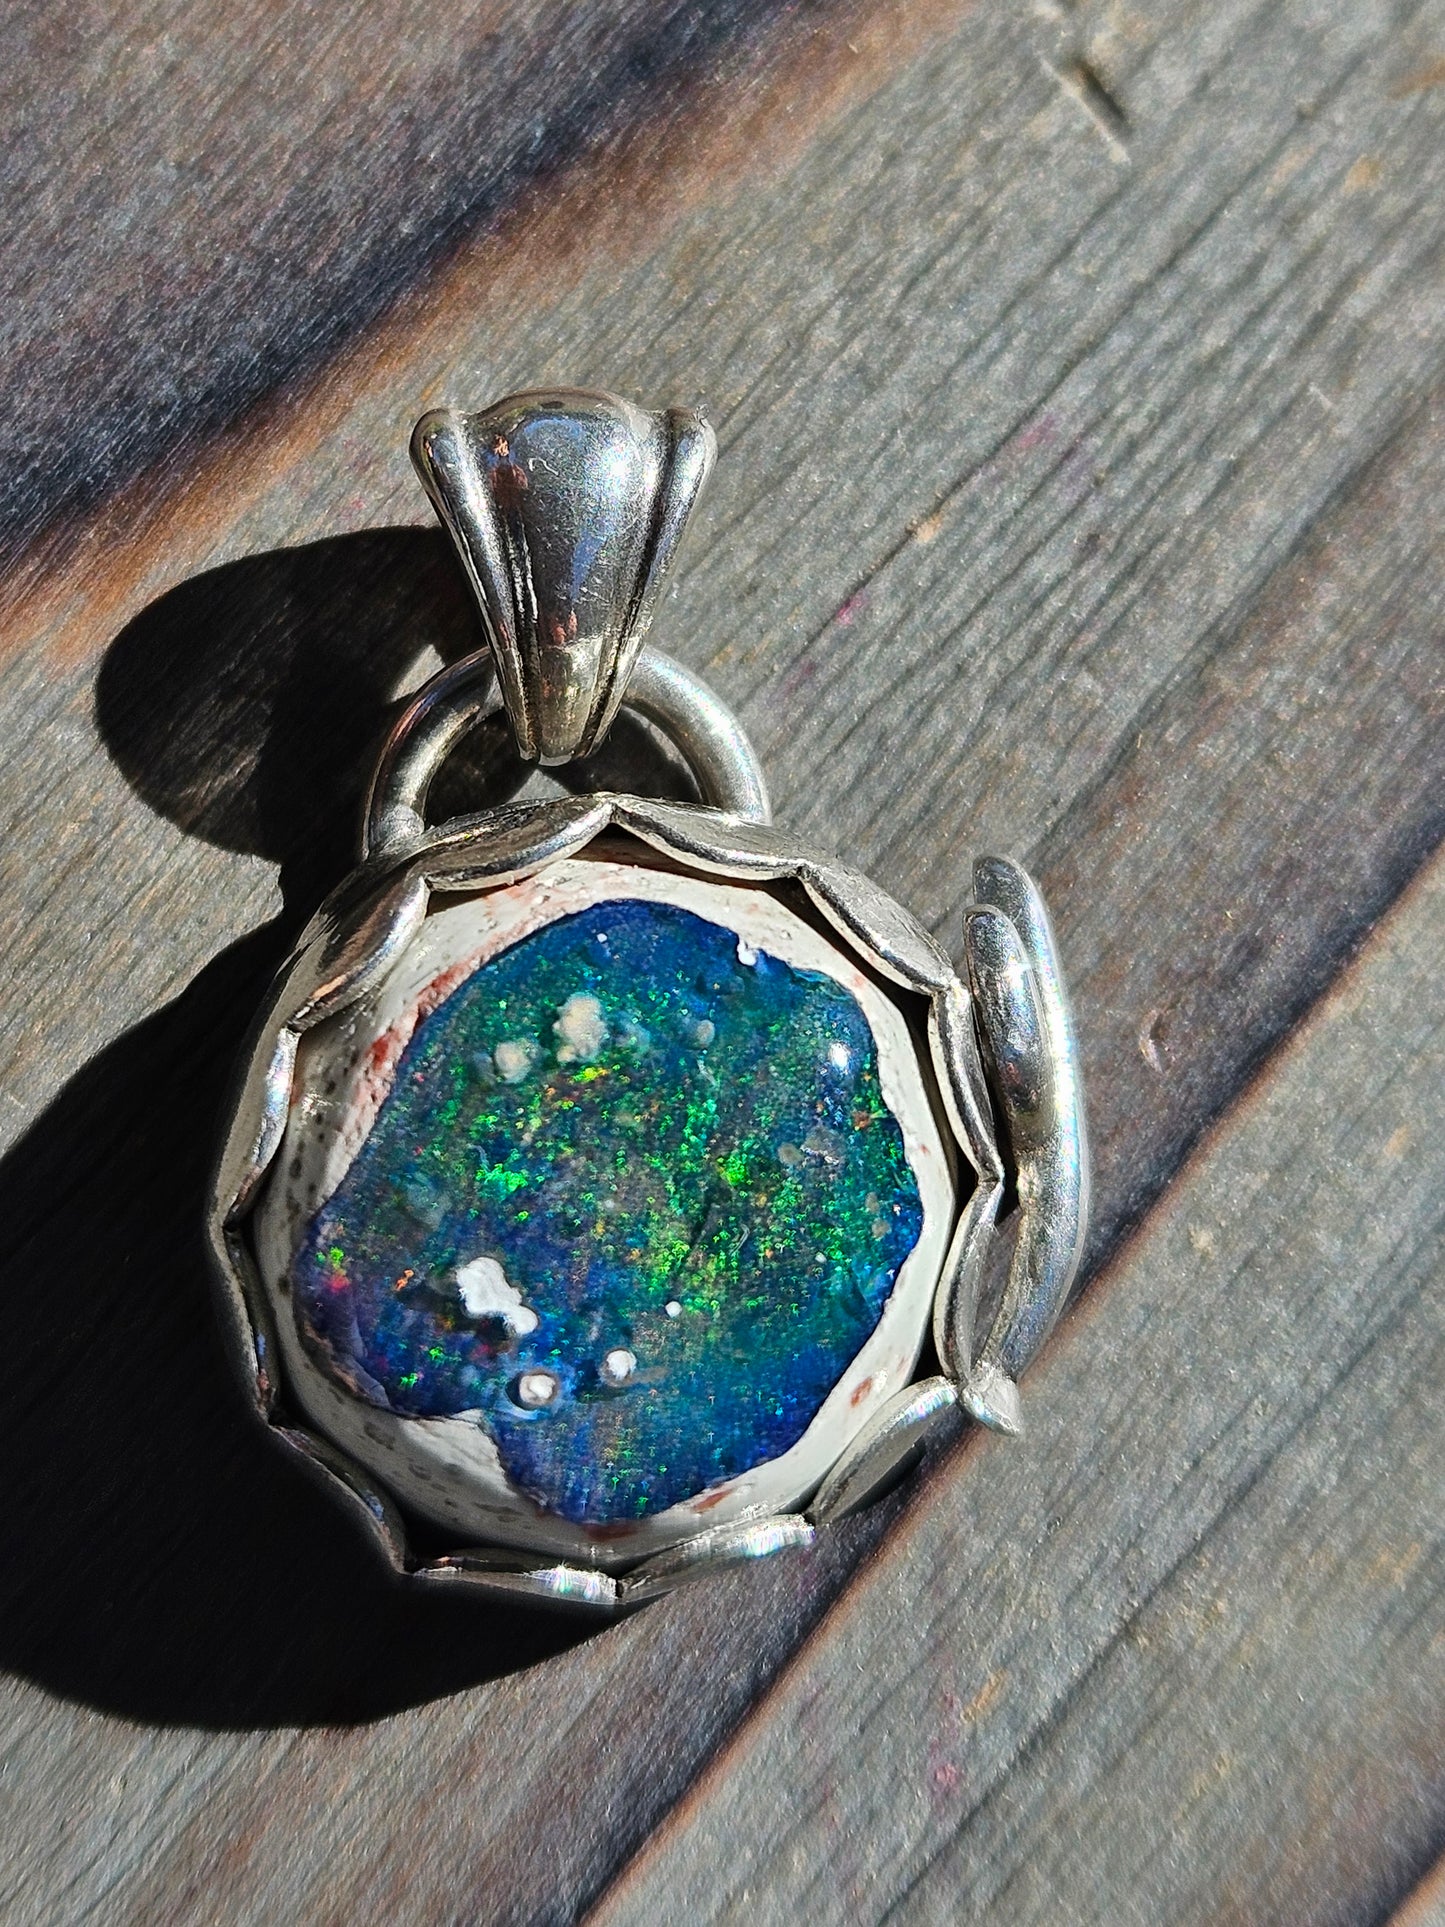 "Desert" Mexican Galaxy Opal and Cactus Pendant